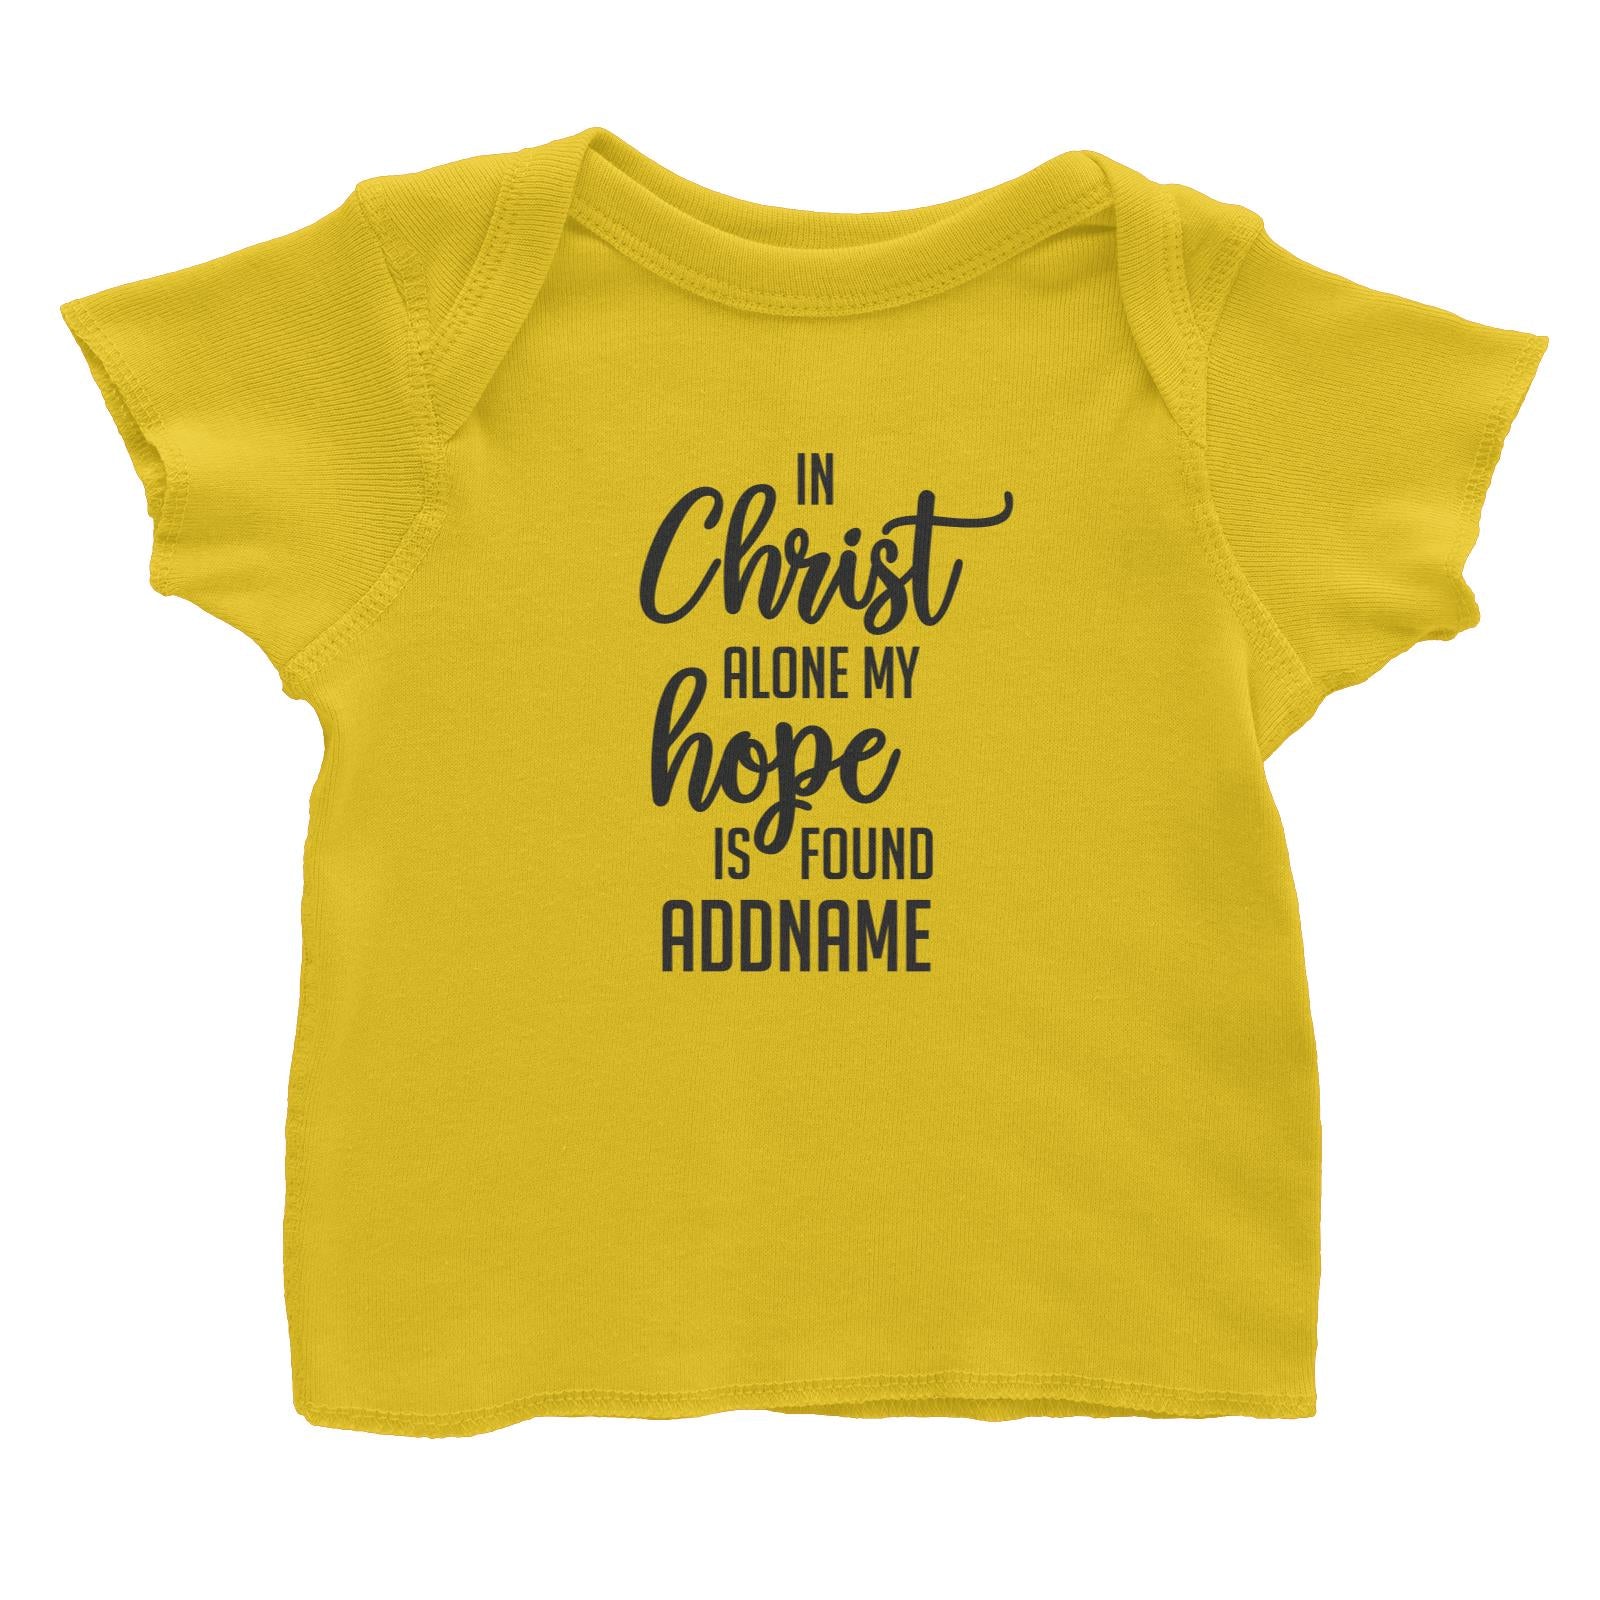 Christian Series In Christ Alone My Hope Is Found Addname Baby T-Shirt